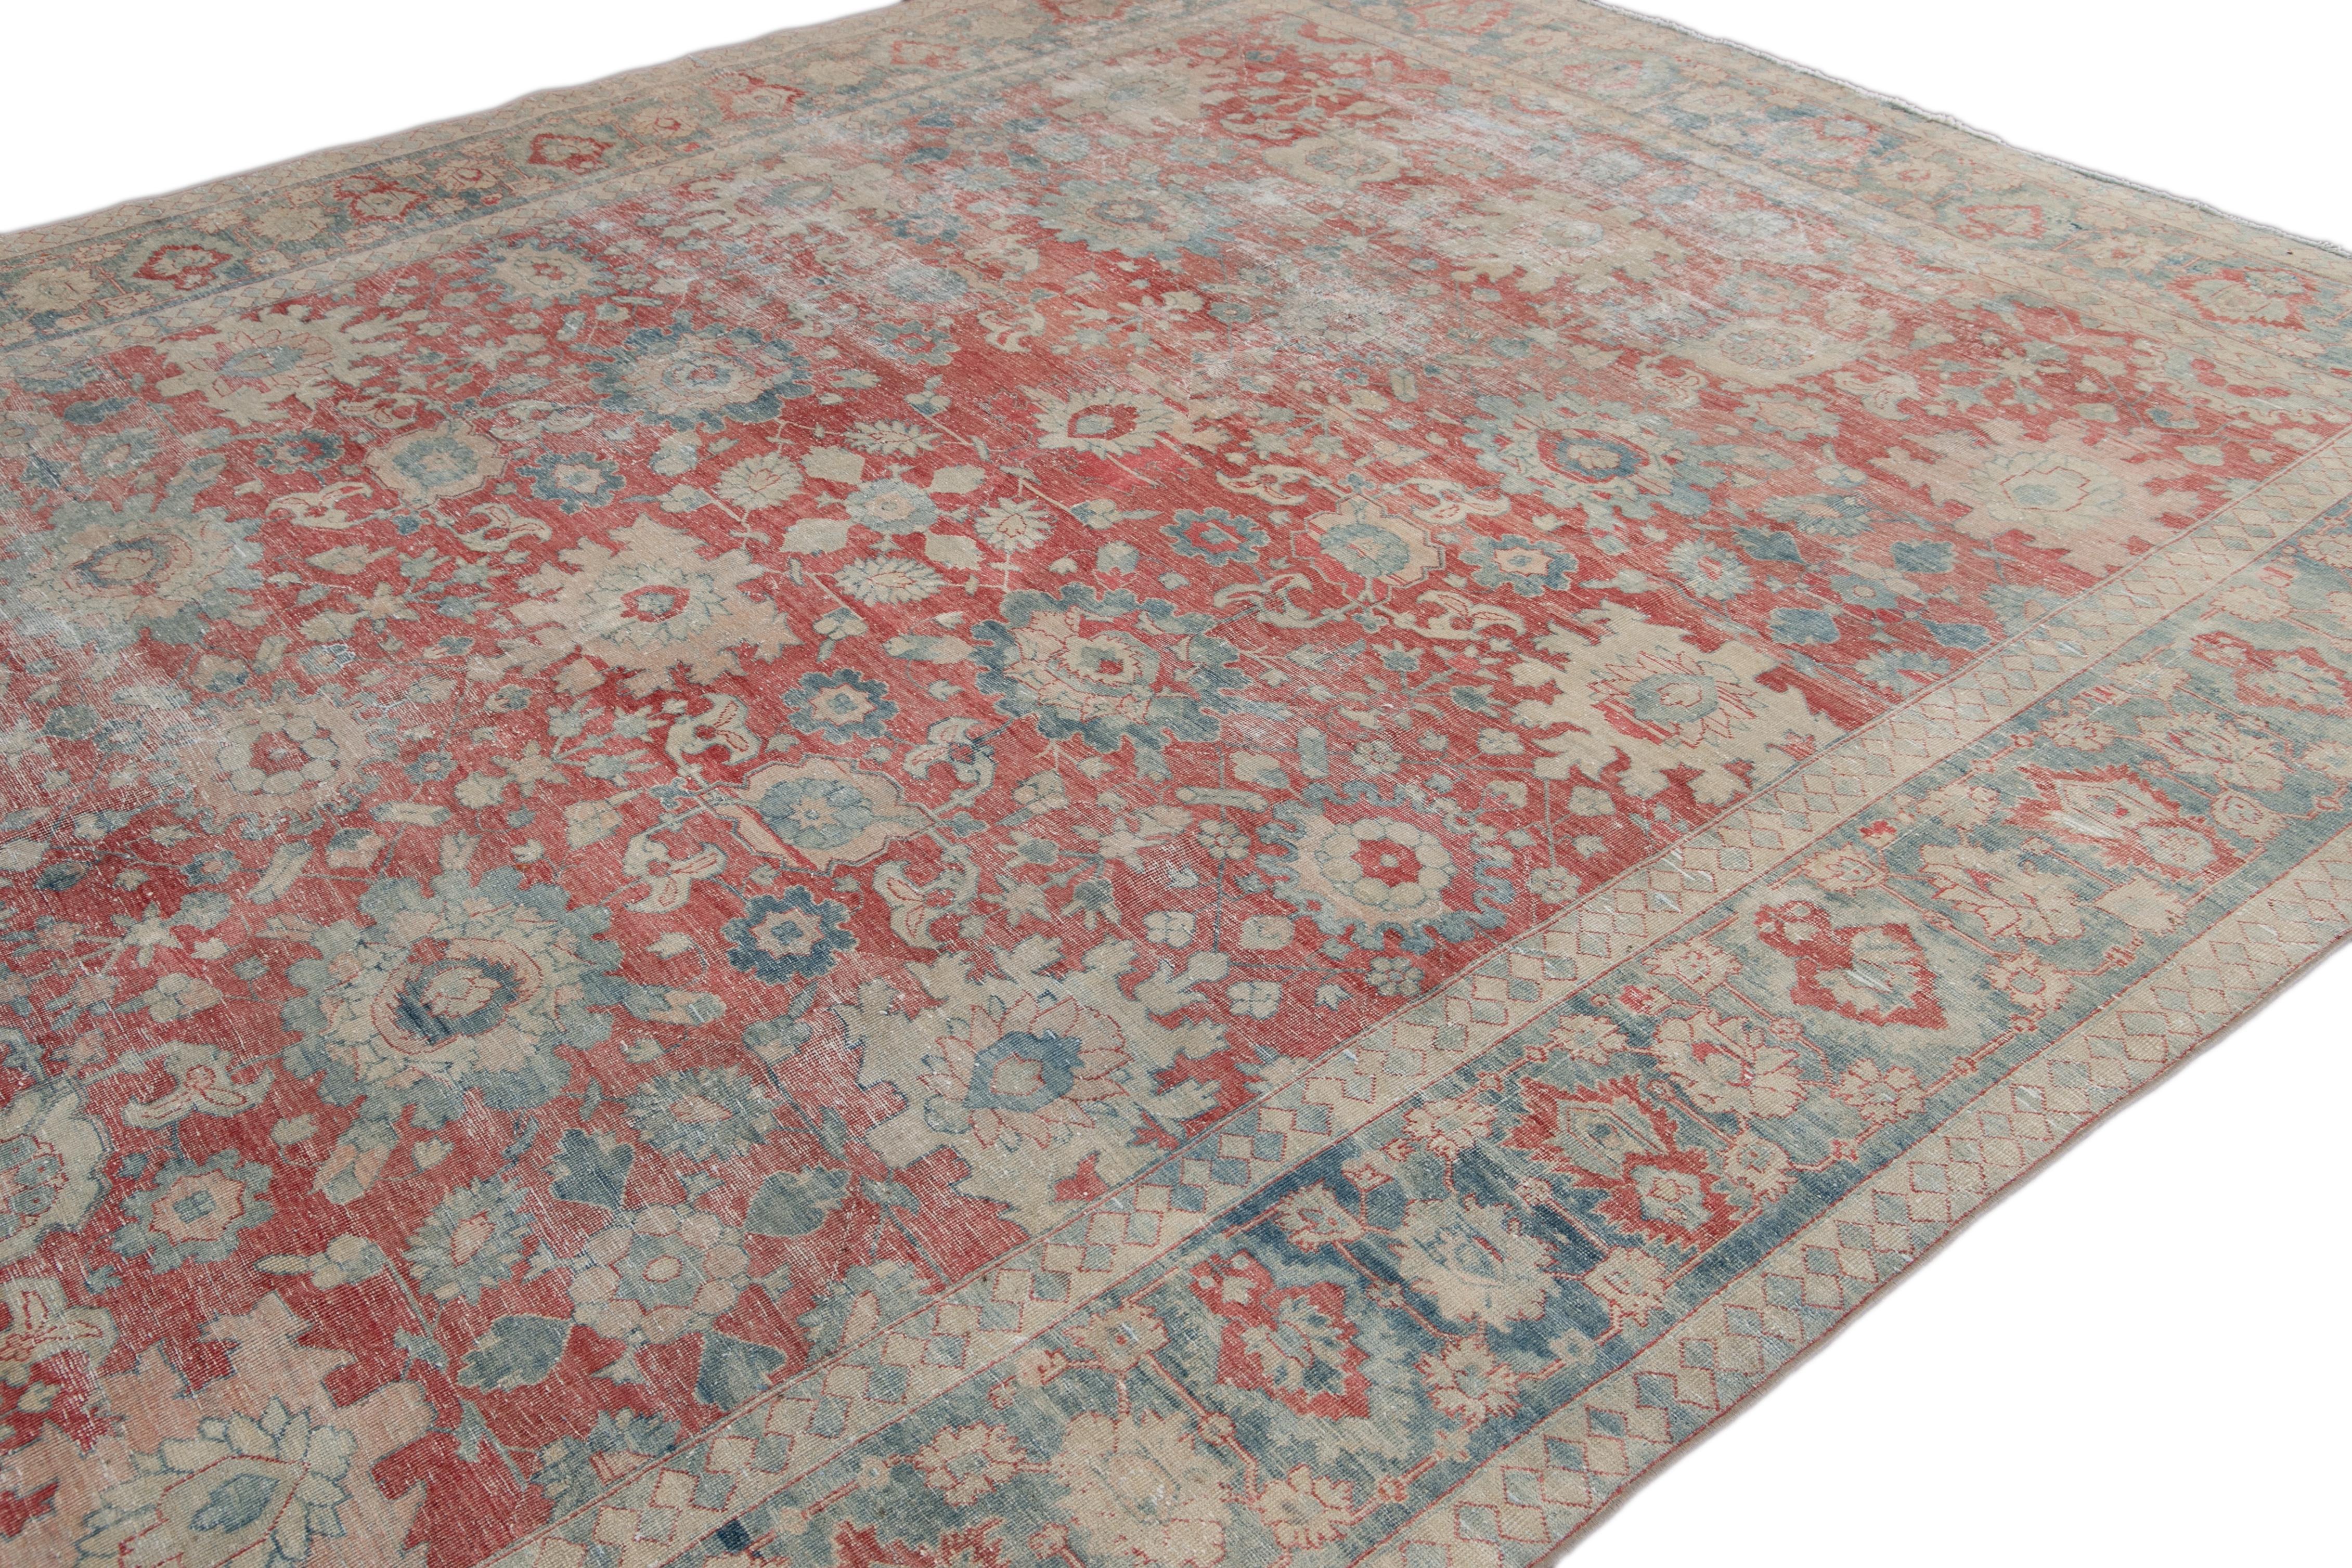 Antique Mahal Handmade Red Wool Rug In Distressed Condition For Sale In Norwalk, CT